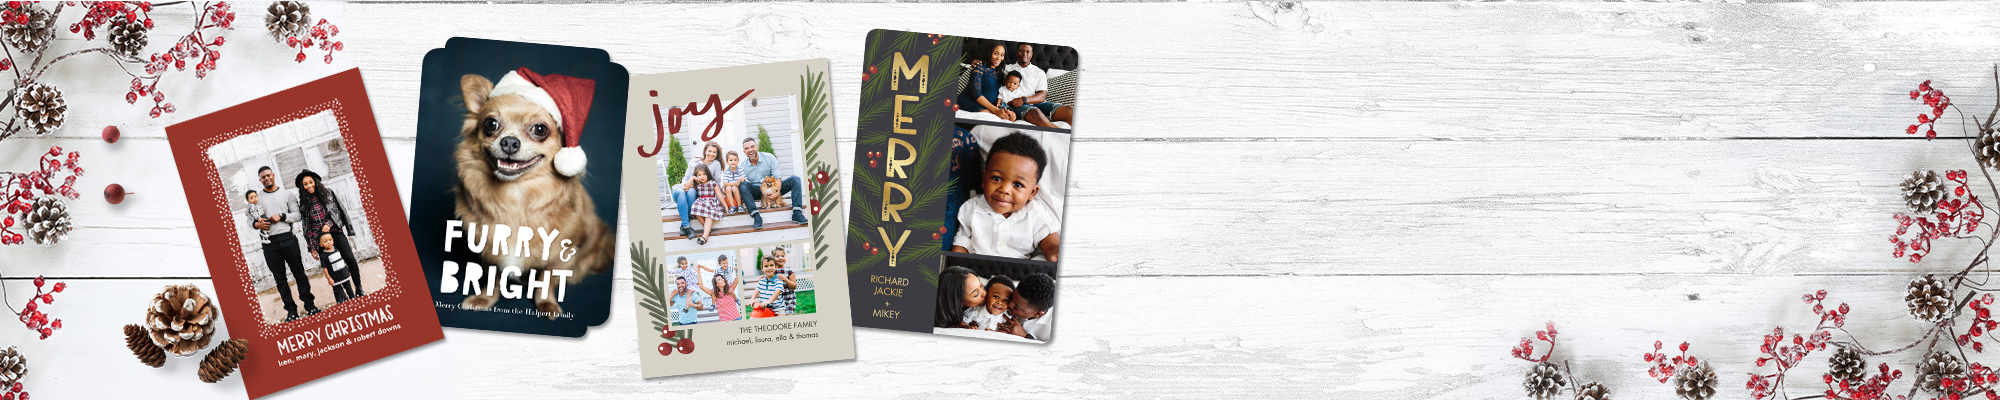 Photo Cards Personalized Cards Christmas Holiday Cards Snapfish Us